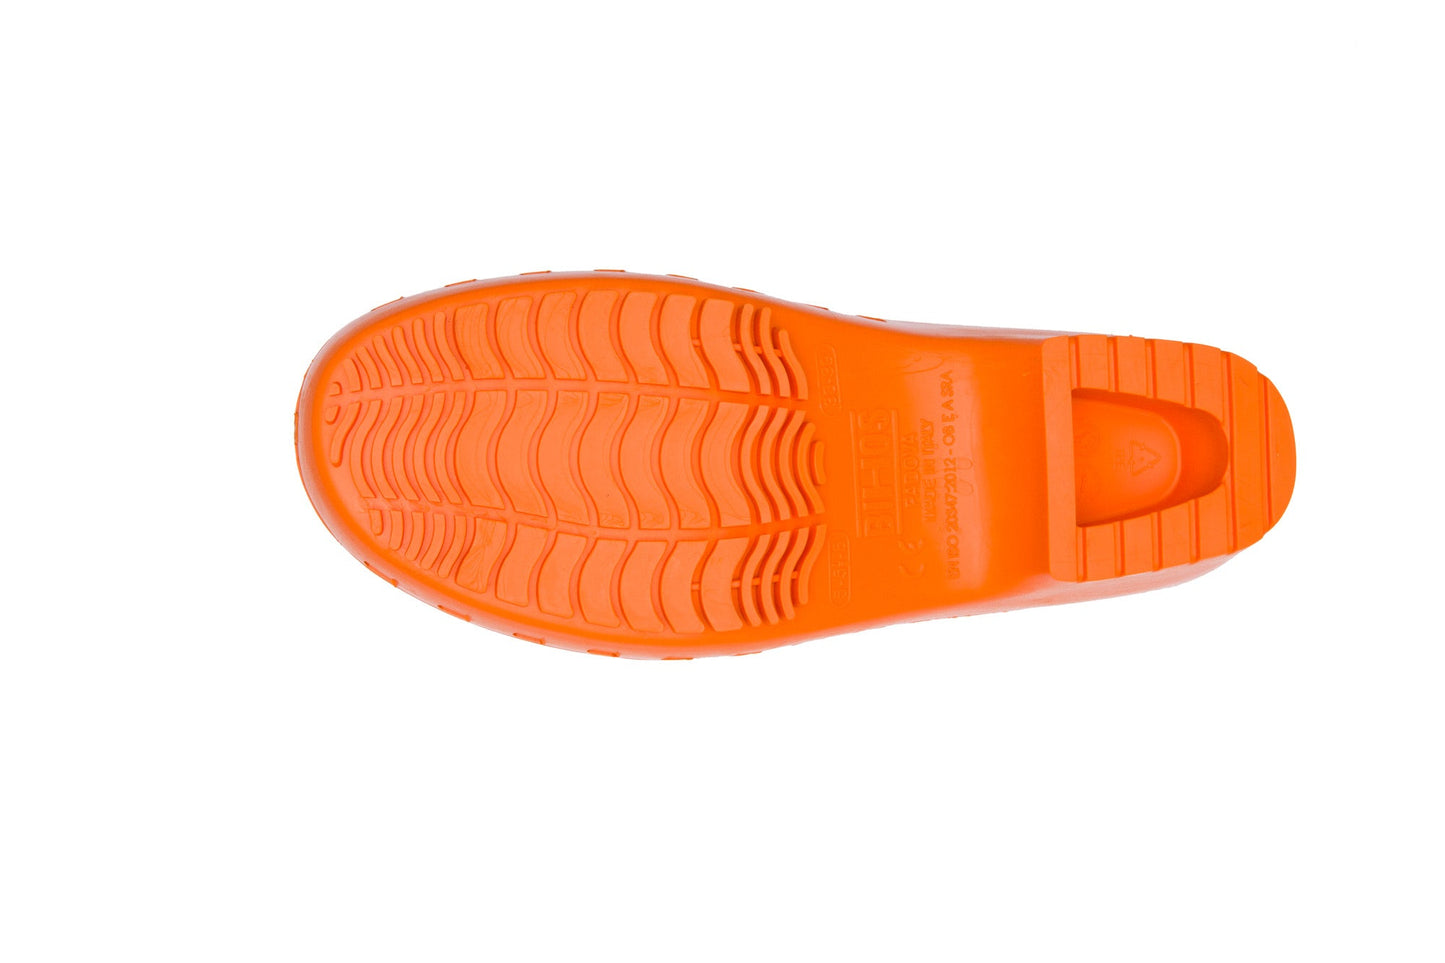 Calzuro Classic clogs without Upper Holes - Orange